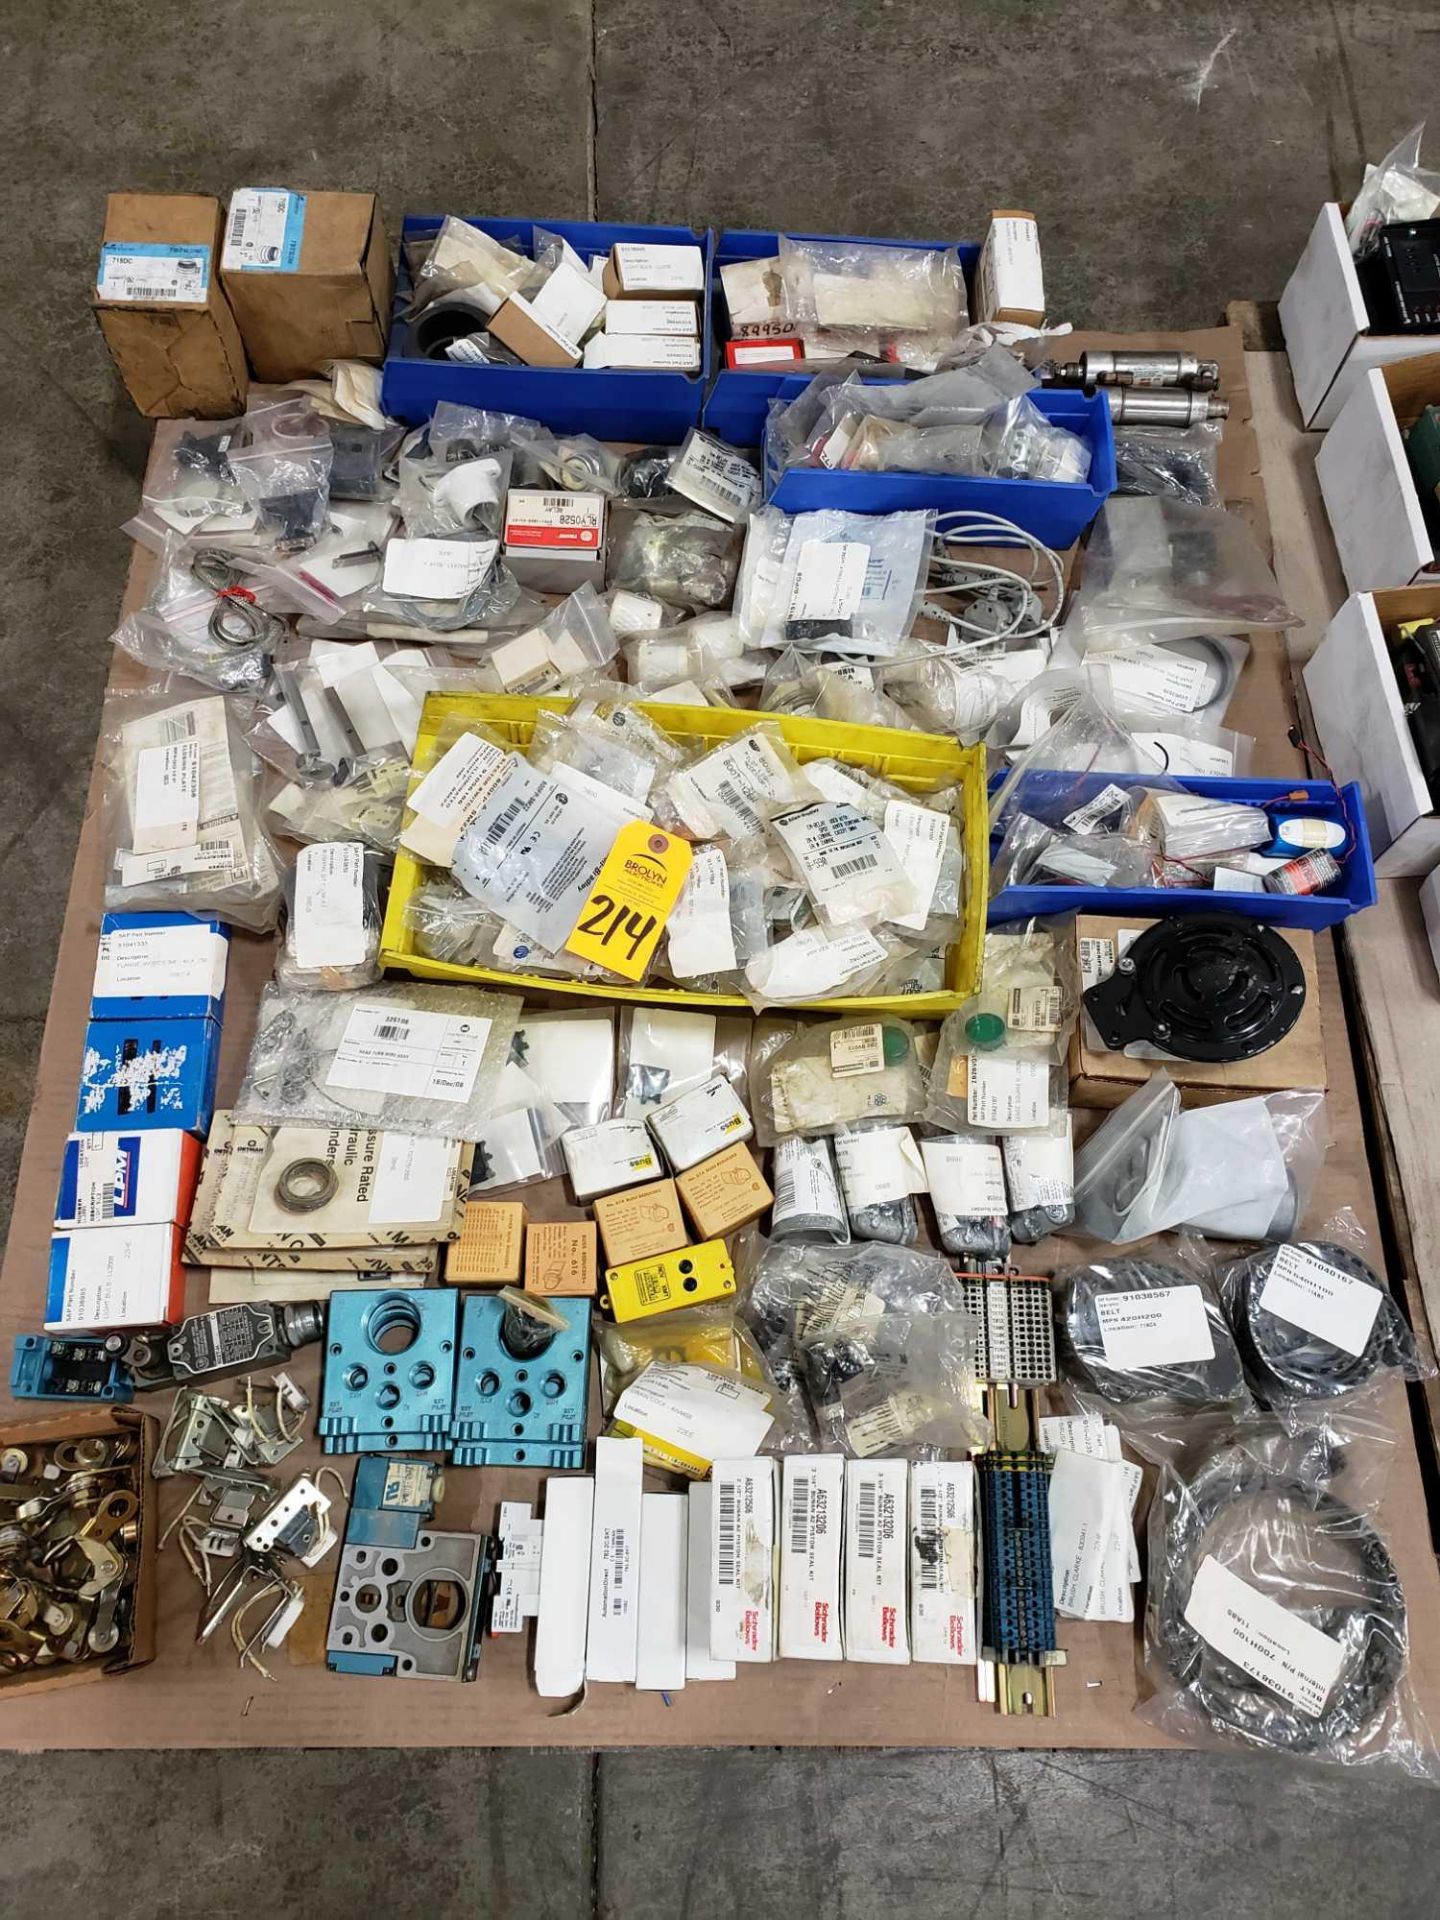 Pallet of assorted electrical and parts.